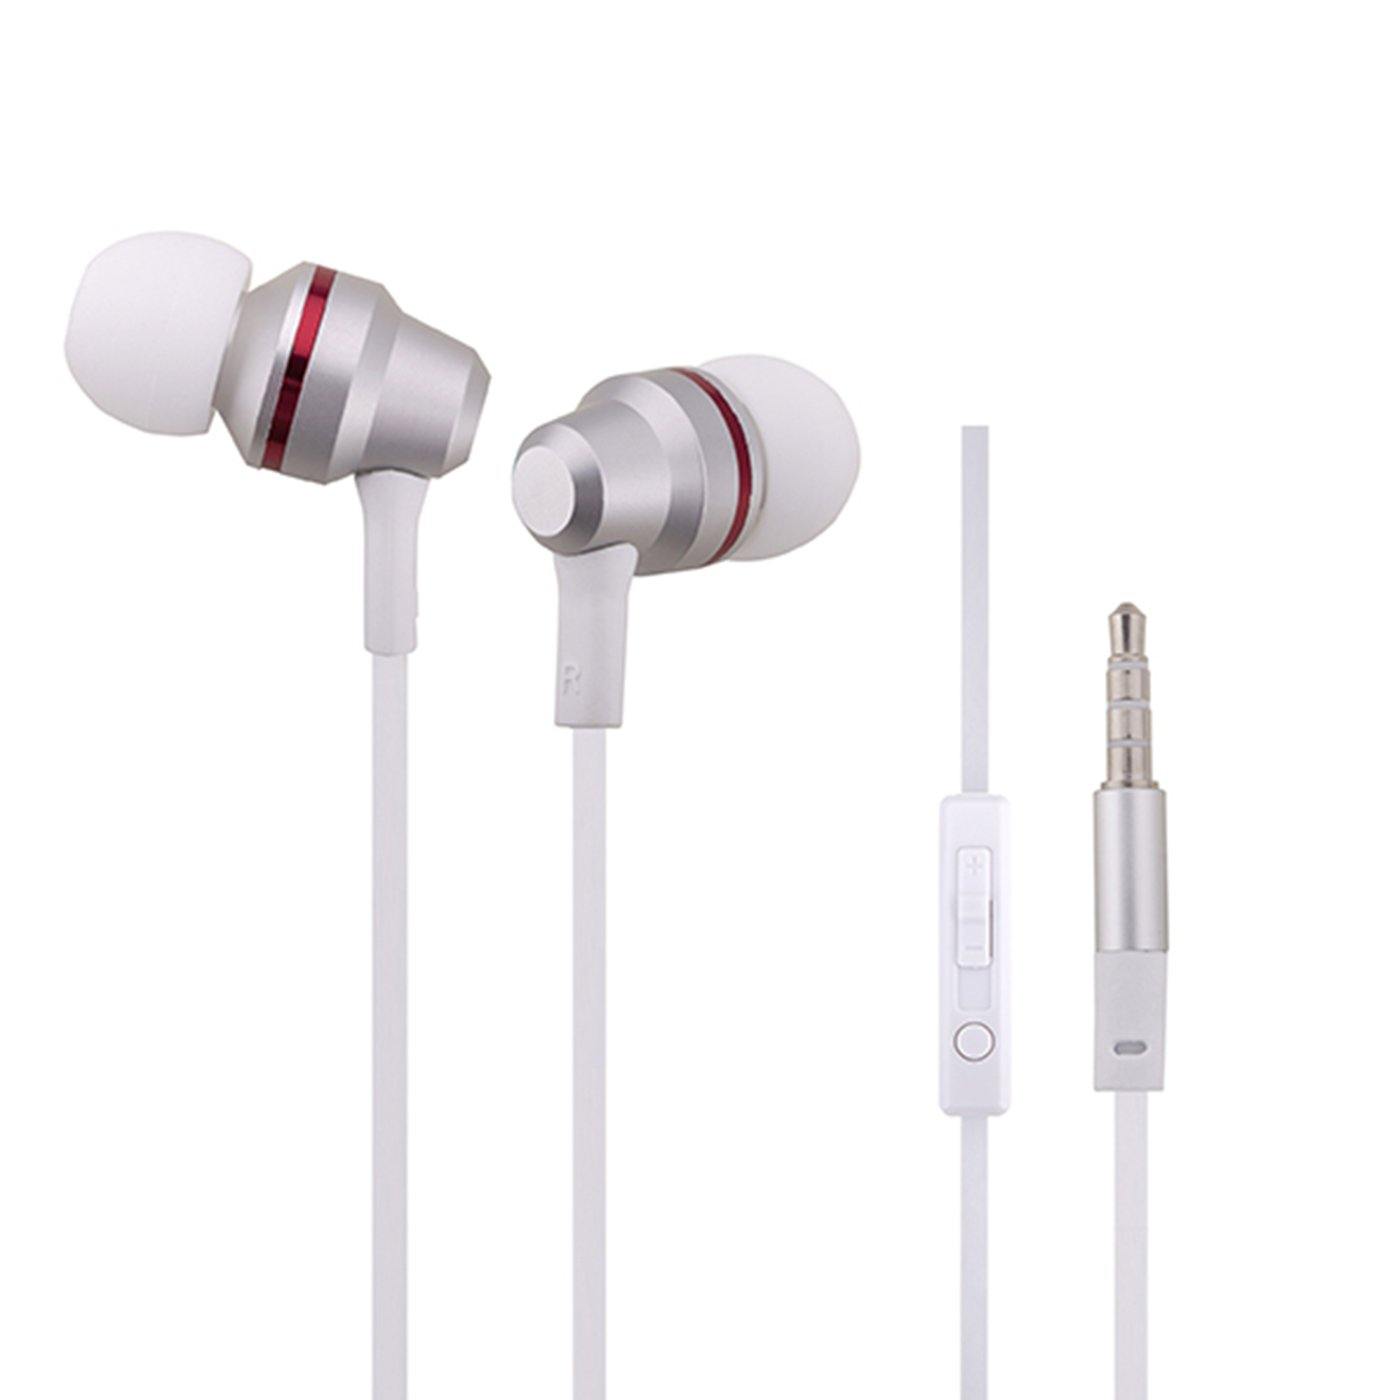 B800 In-Ear Noise Isolating Heavy Bass Headphones with Mic In White (Without Carrying Cases)